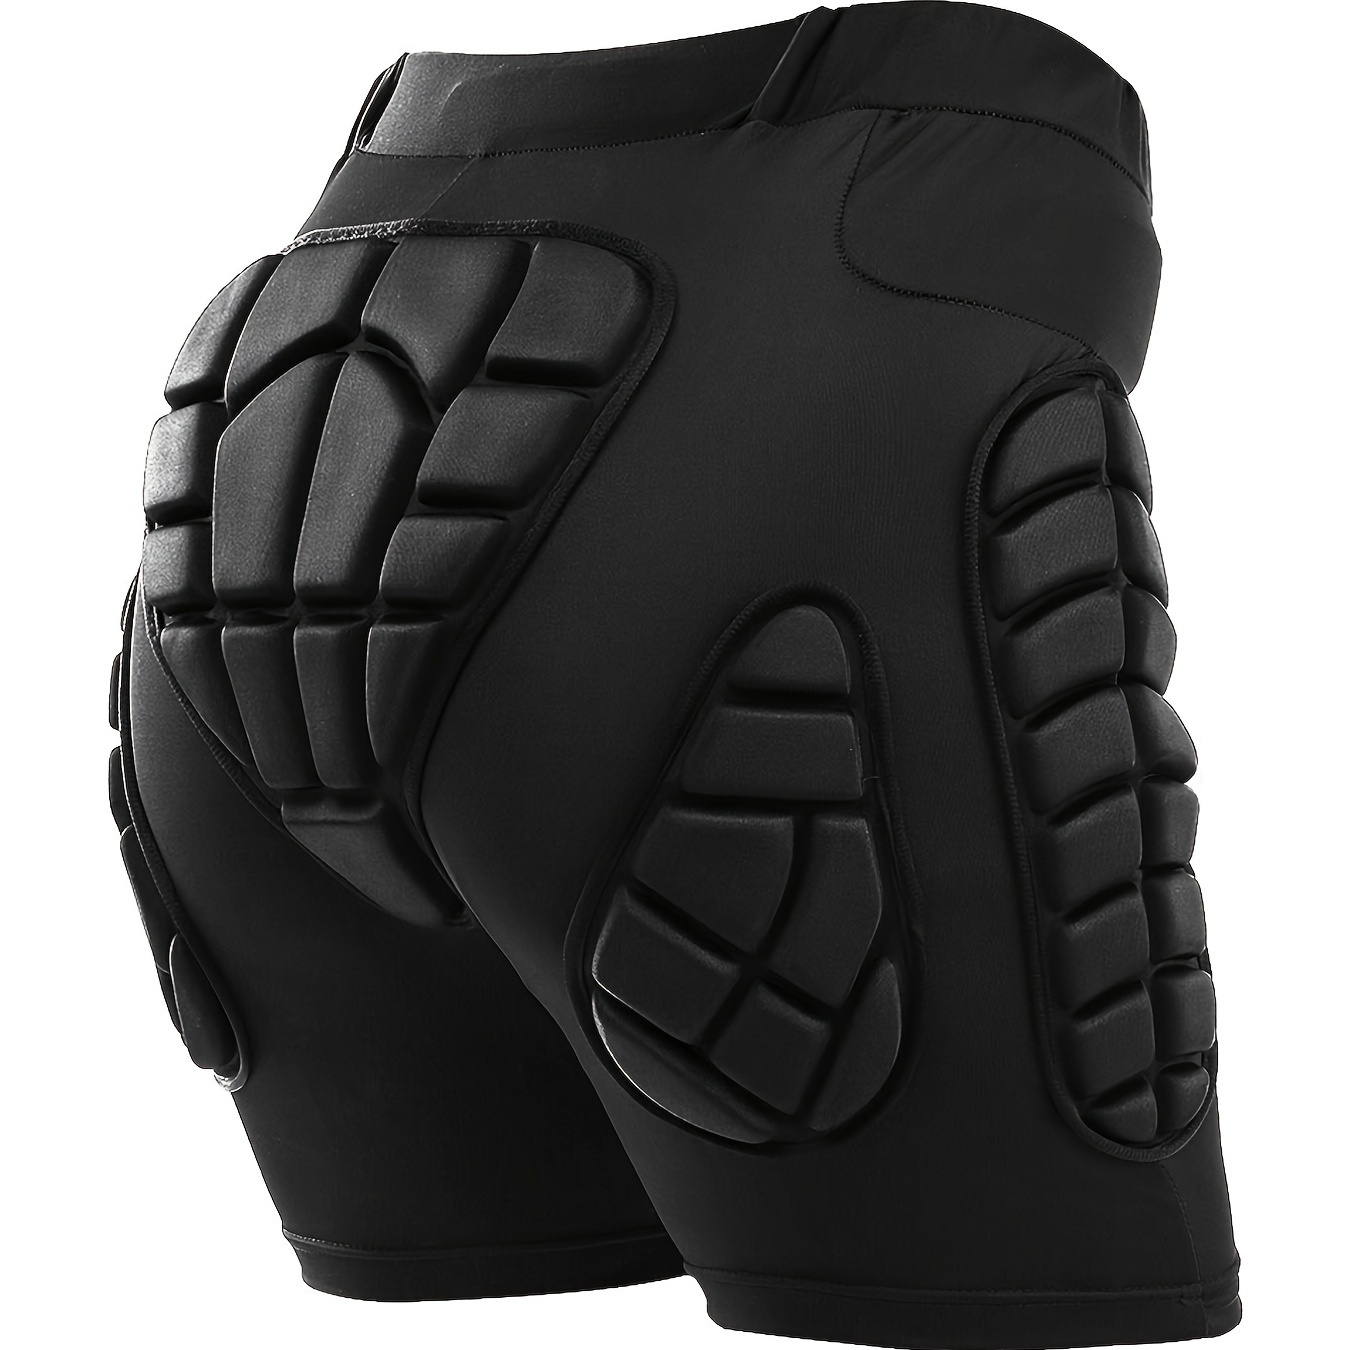 

Breathable 3d Protection Gear For Hip, Butt, And Tailbone-protective Padded Impact Shorts